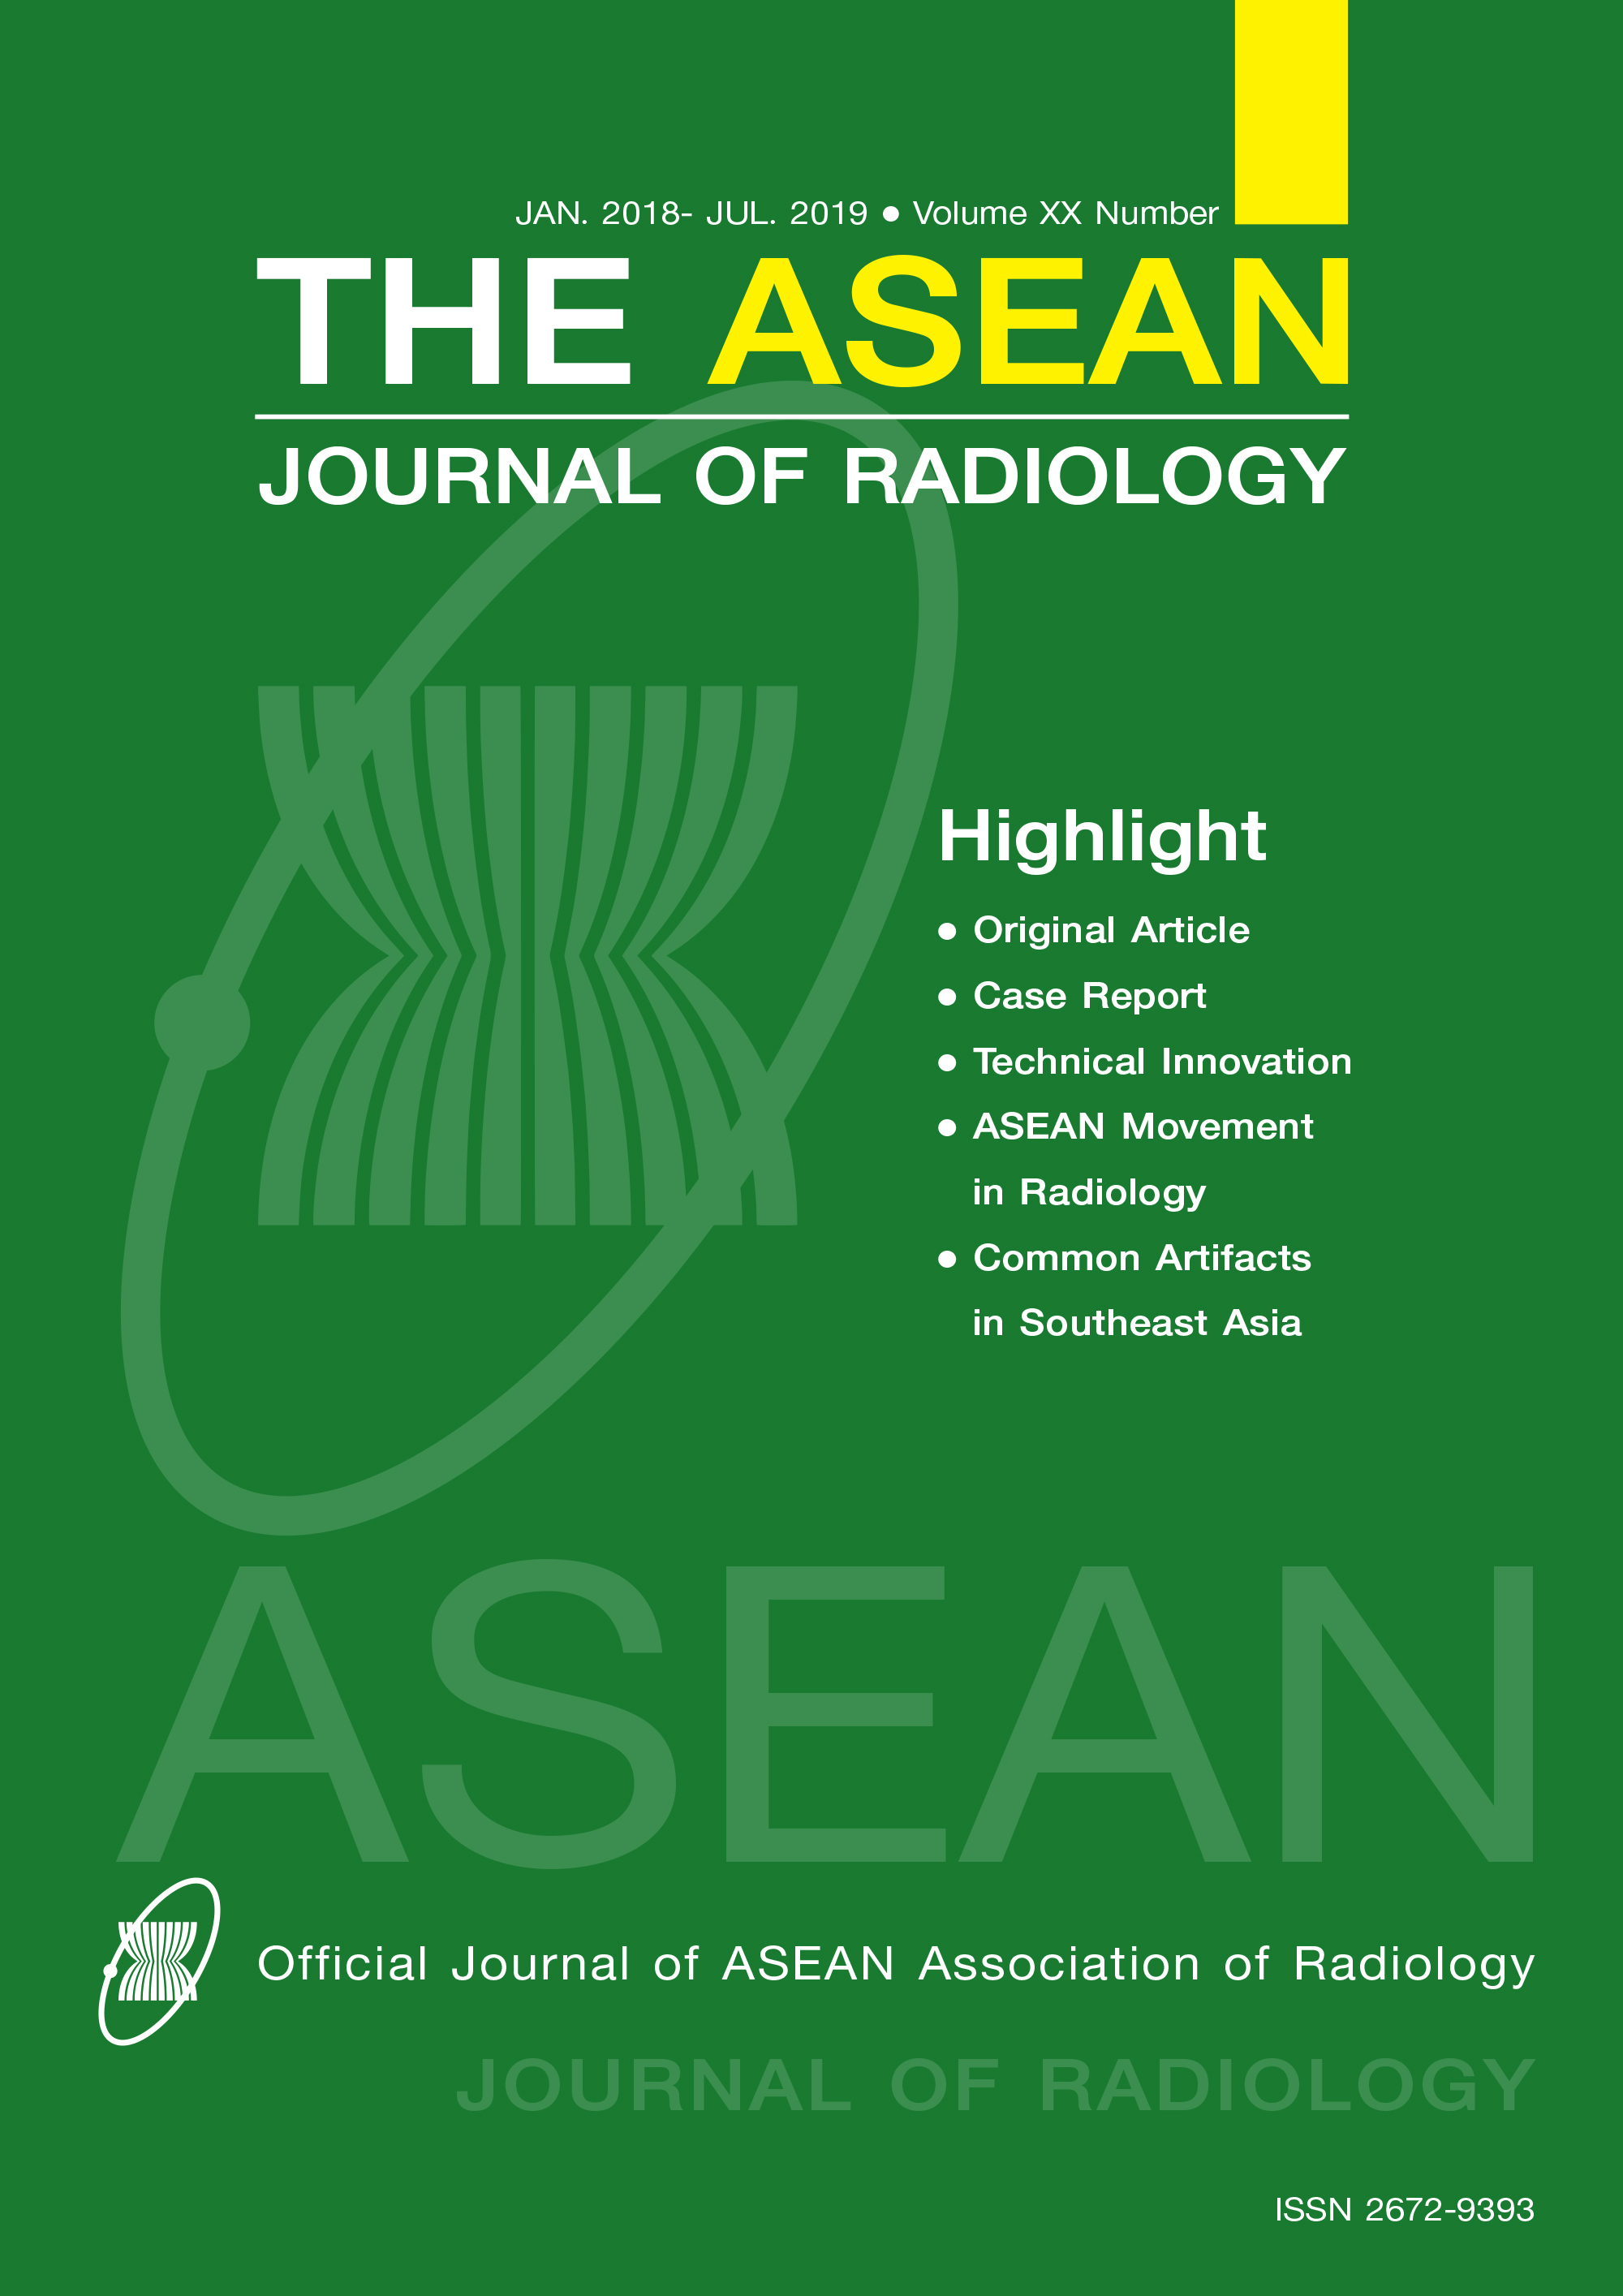 					View Vol. 20 No. 1 (2019): The first fully online issue of The ASEAN Journal of Radiology
				